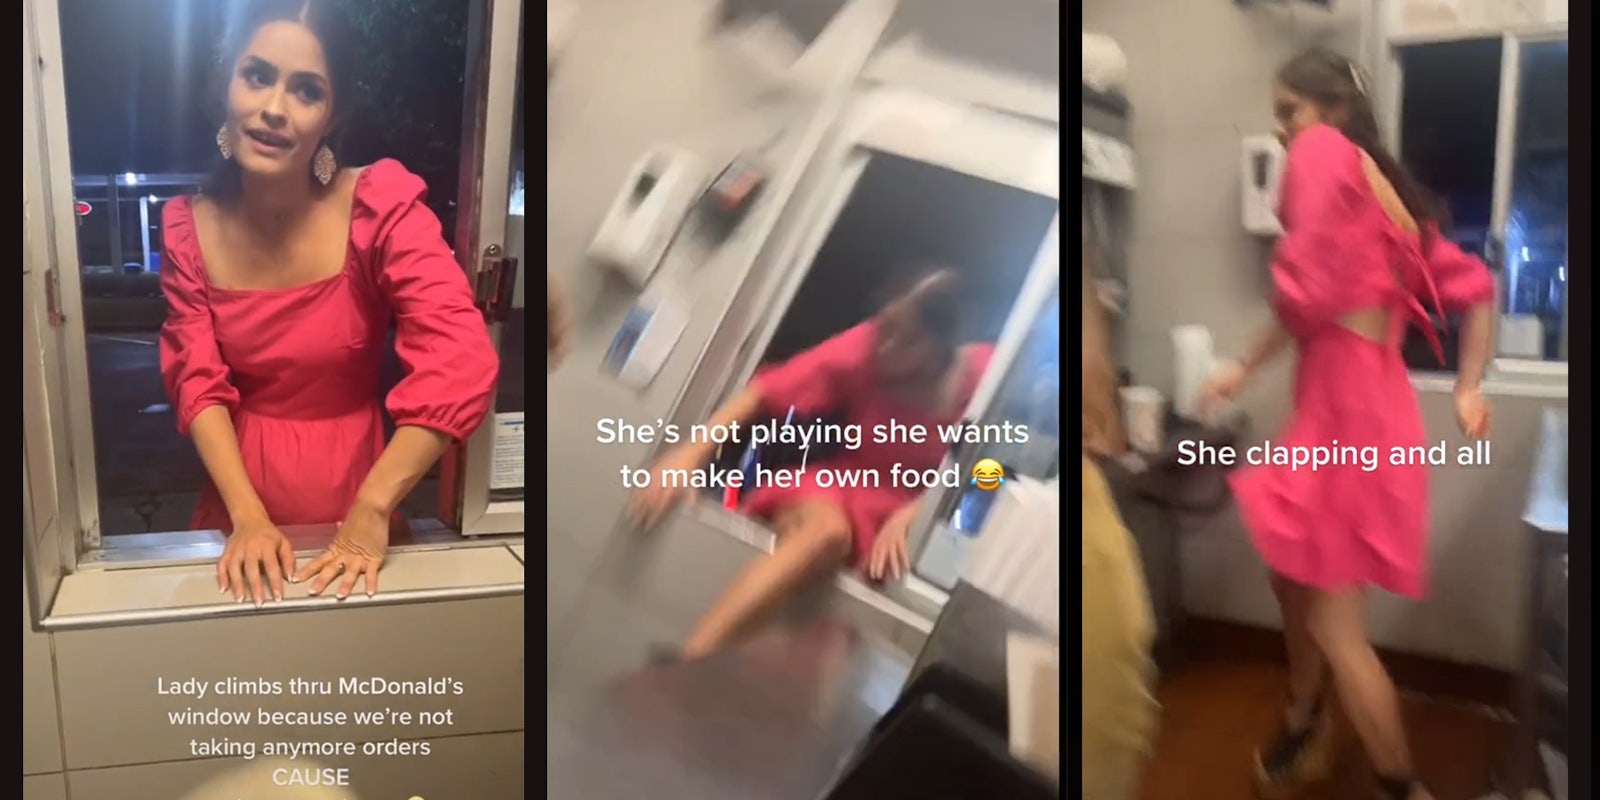 young woman in dress at drive thru window, caption 'Lady climbs through McDonald's window because we're not taking anymore orders CAUSE' (l) woman climbing through window with caption 'She's not playing she wants to make her own food' (c) woman in drive thru with caption 'she clapping and all' (r)